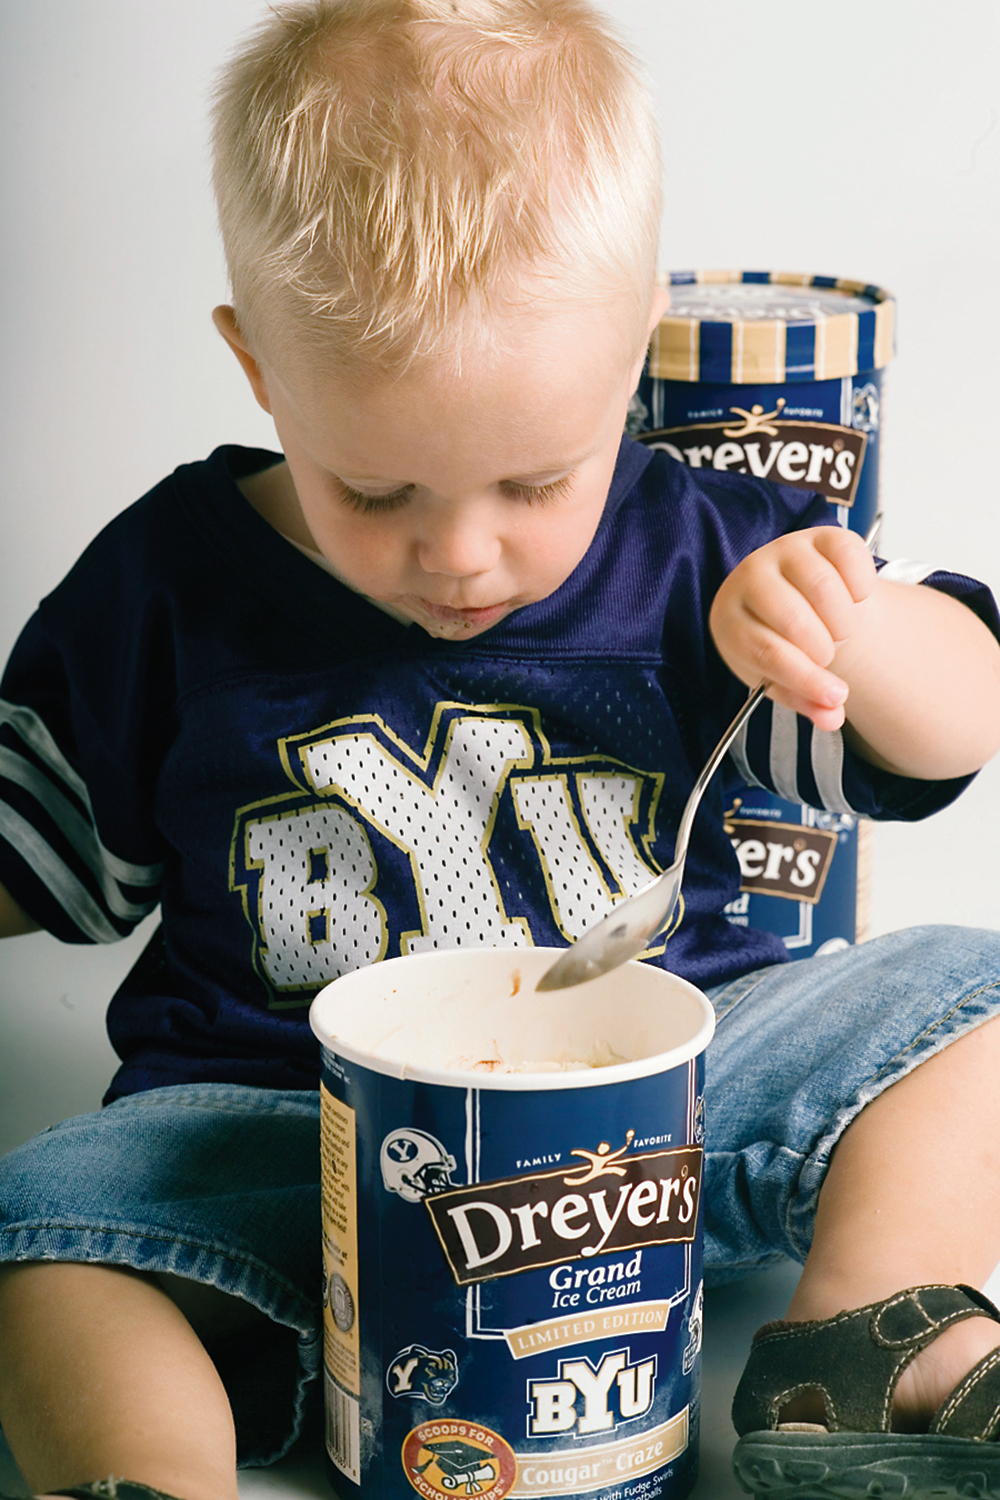 A child eating ice cream straight from the carton.